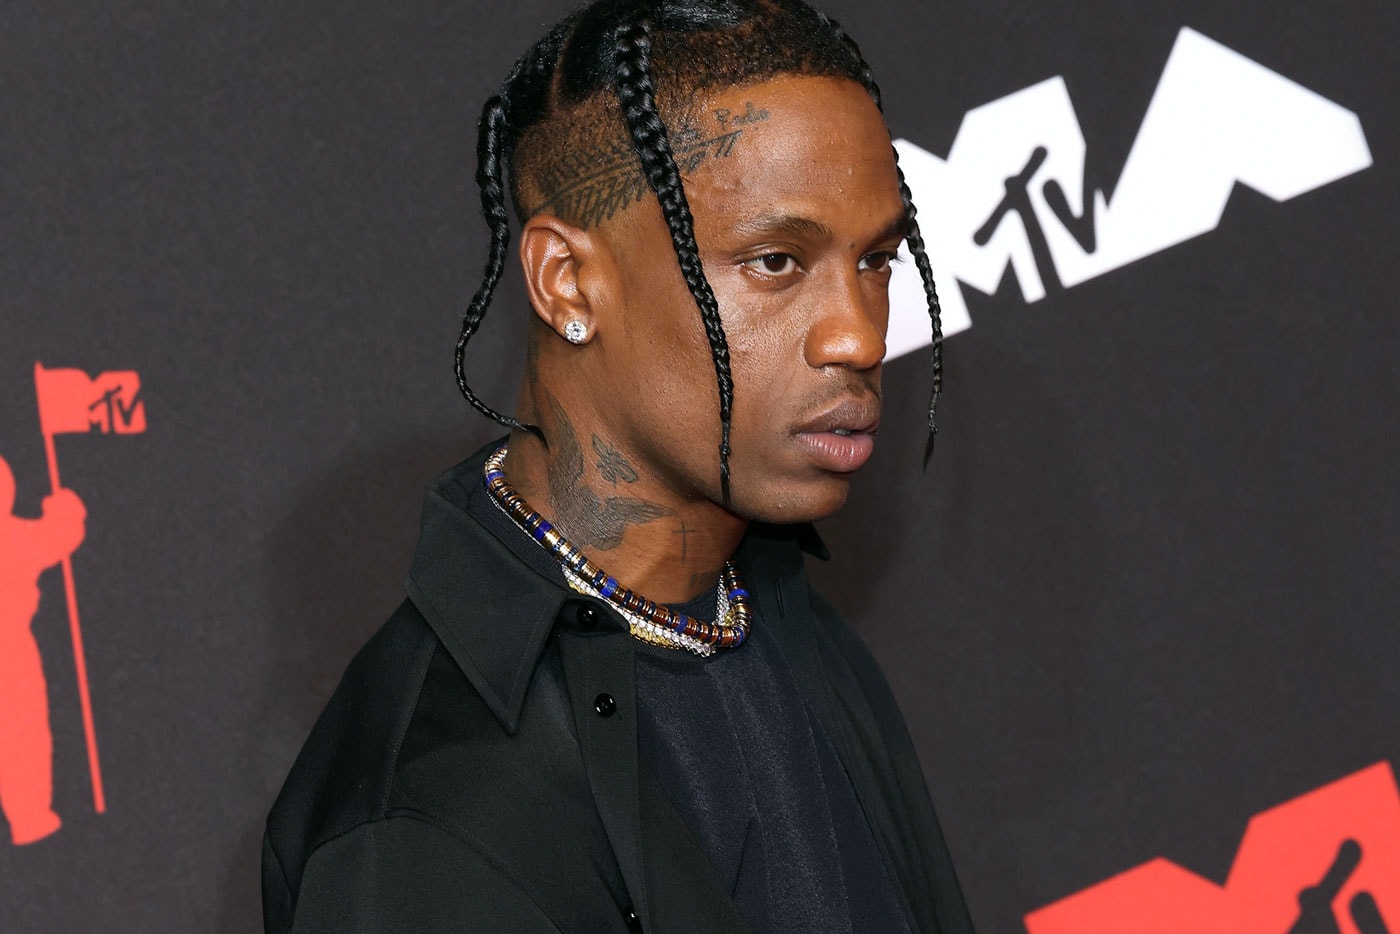 Travi$ Scott Arrested for Disorderly Conduct at Lollapalooza